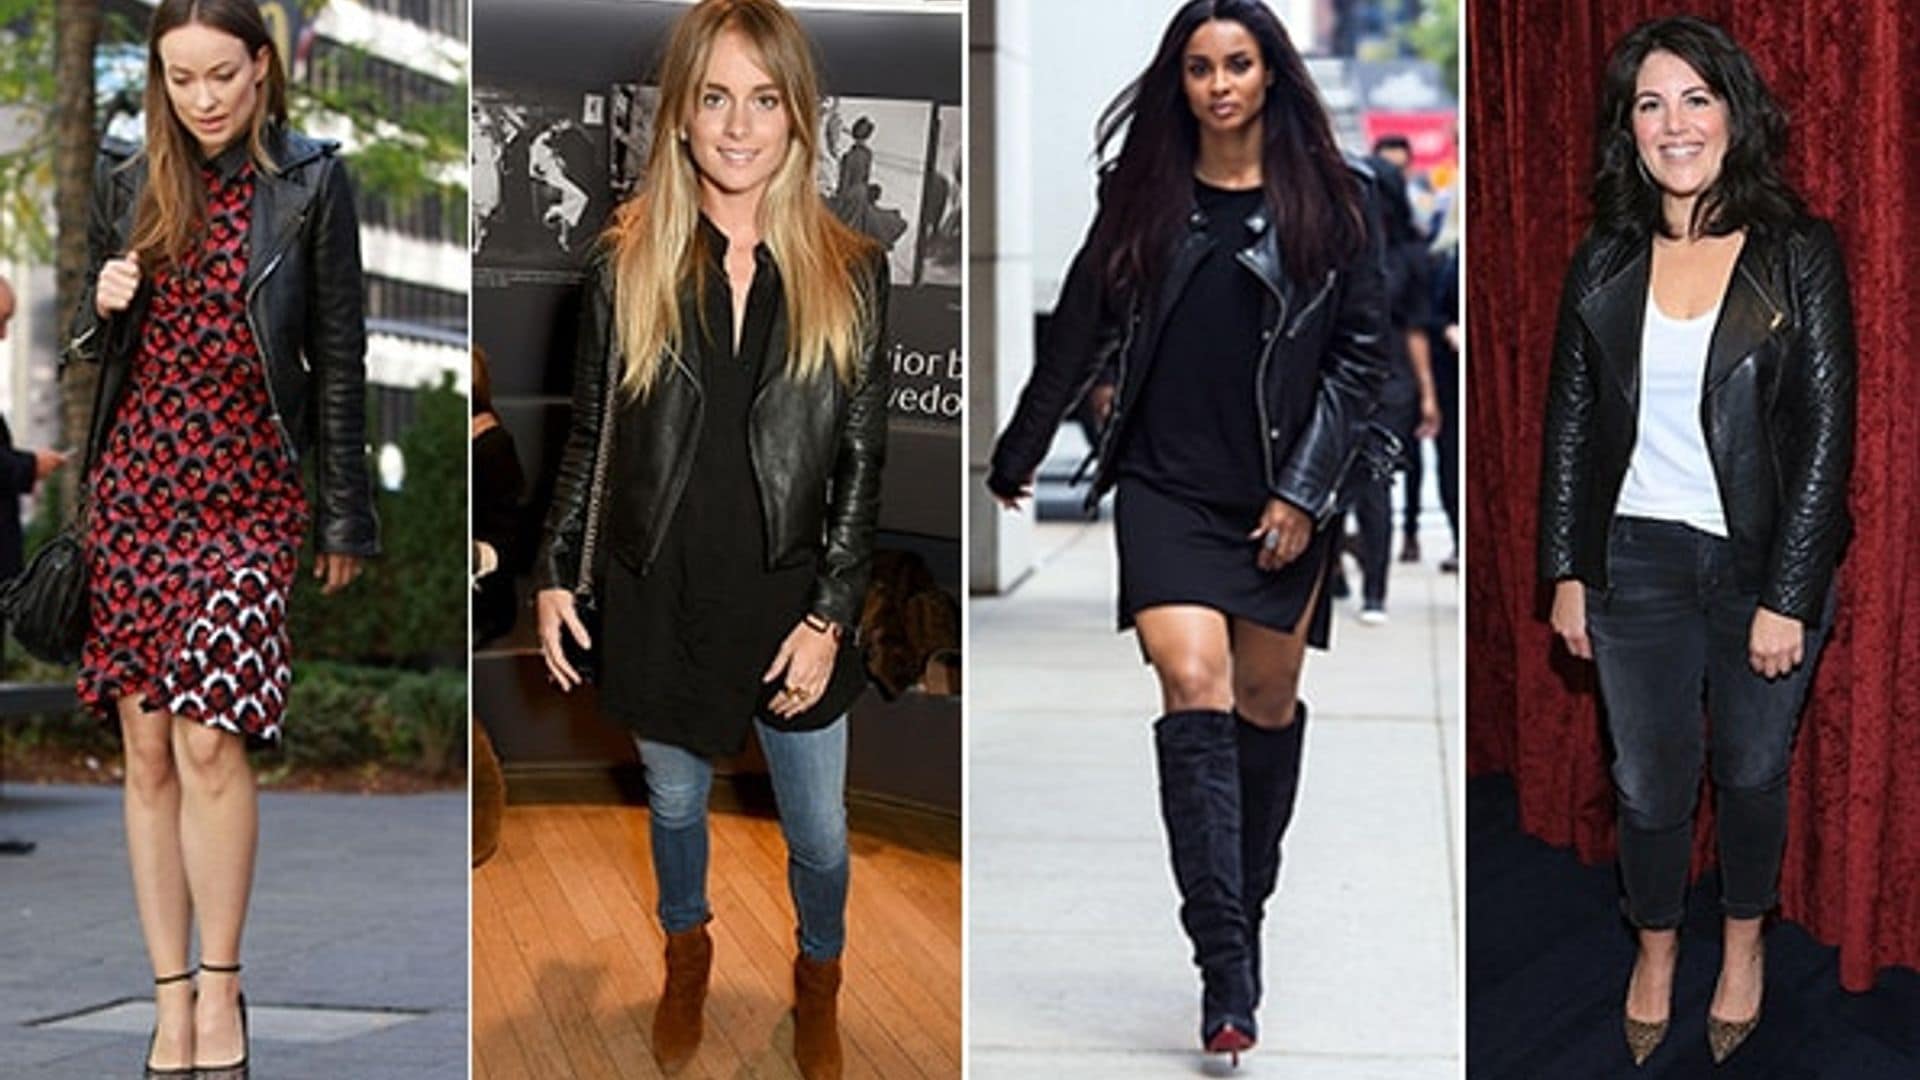 Celebrity style: How to wear a black leather jacket for fall